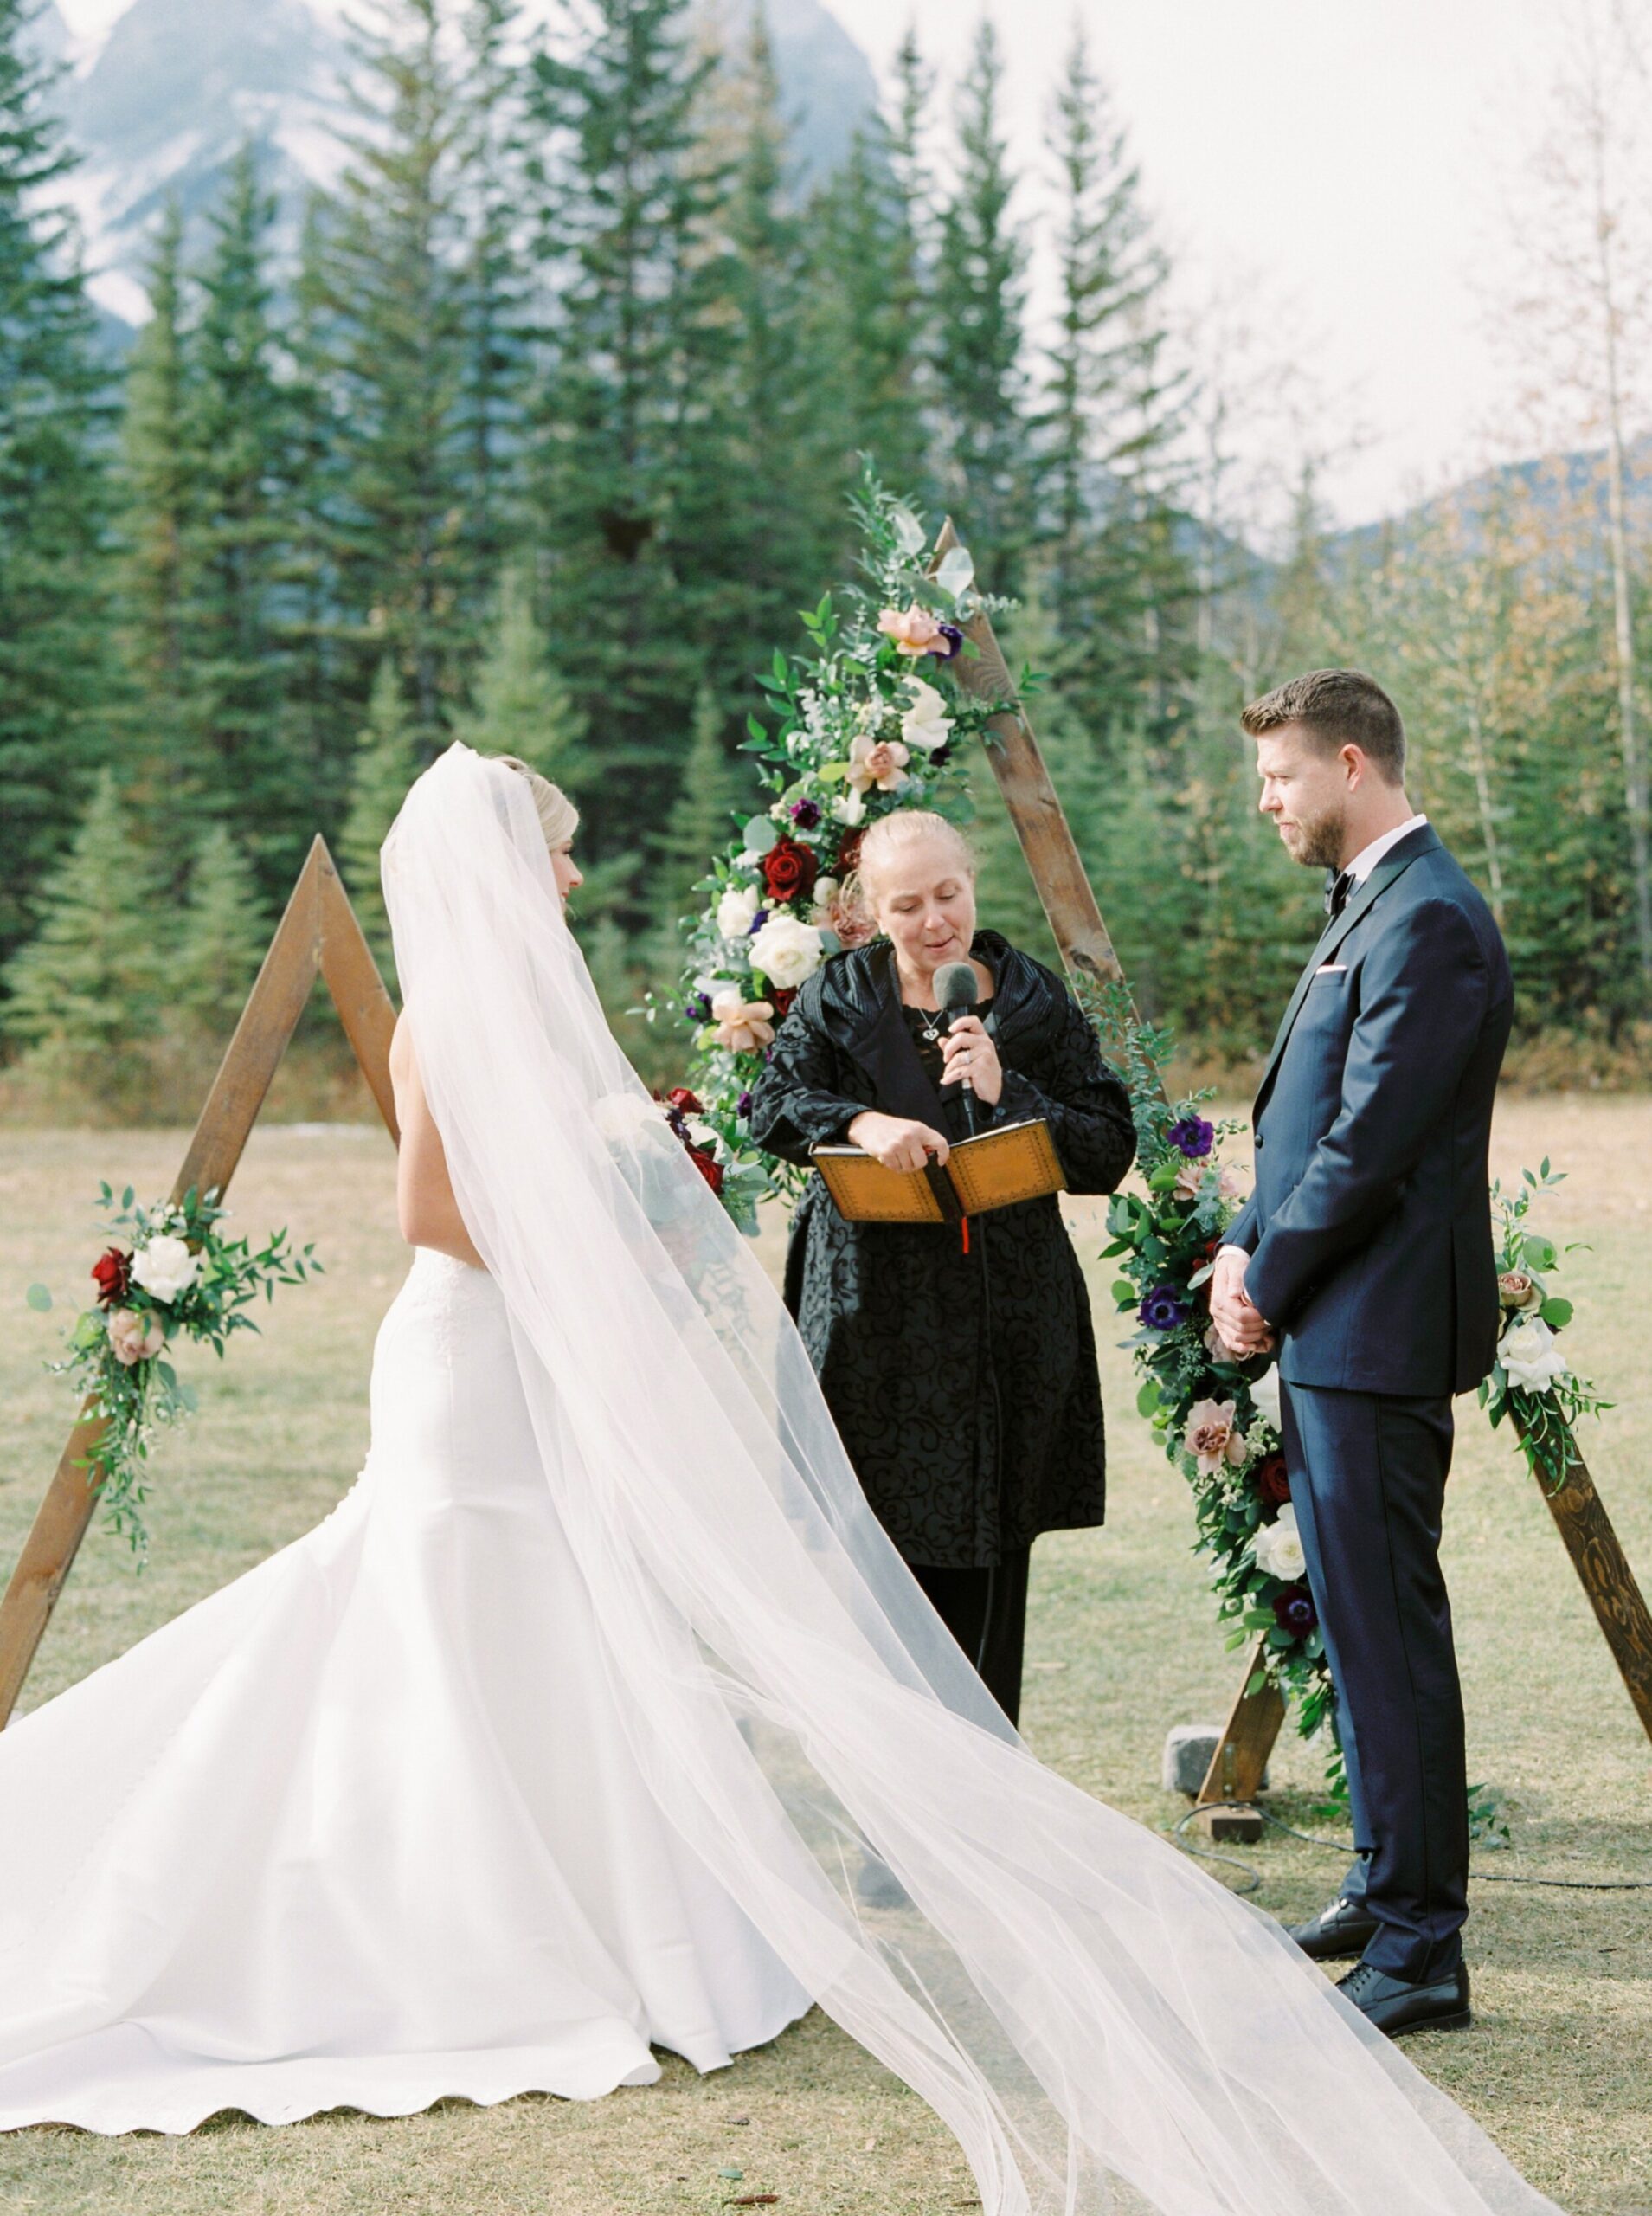  Outdoor mountain ceremony with a triangle floral arch | Cornerstone Theater & Canmore Ranch Wedding Photographers 